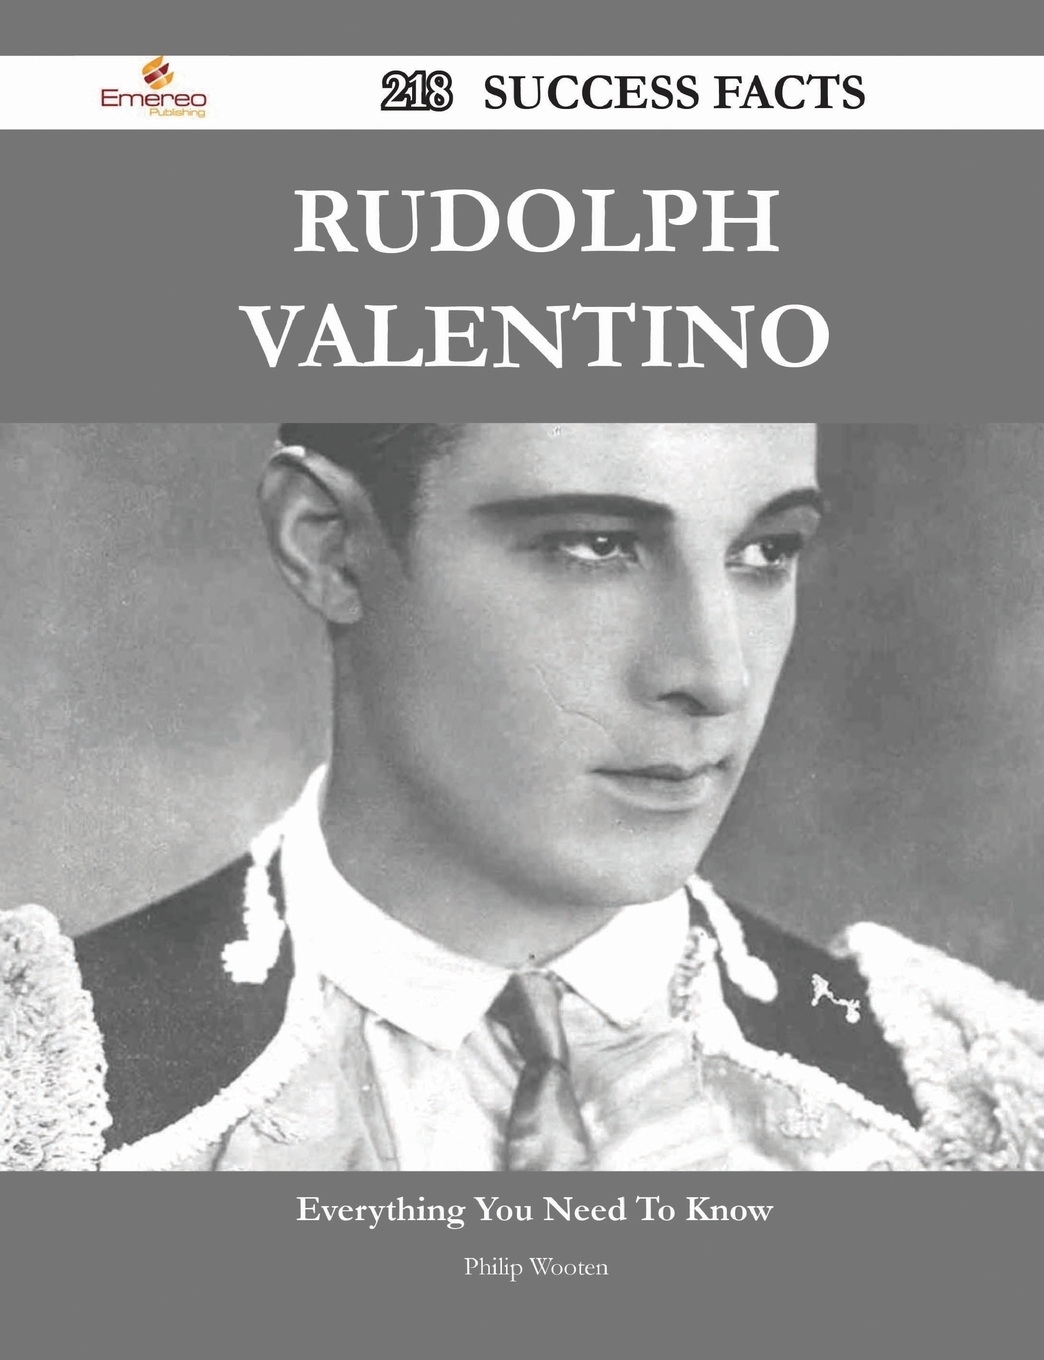 Interesting facts about rudolph valentino